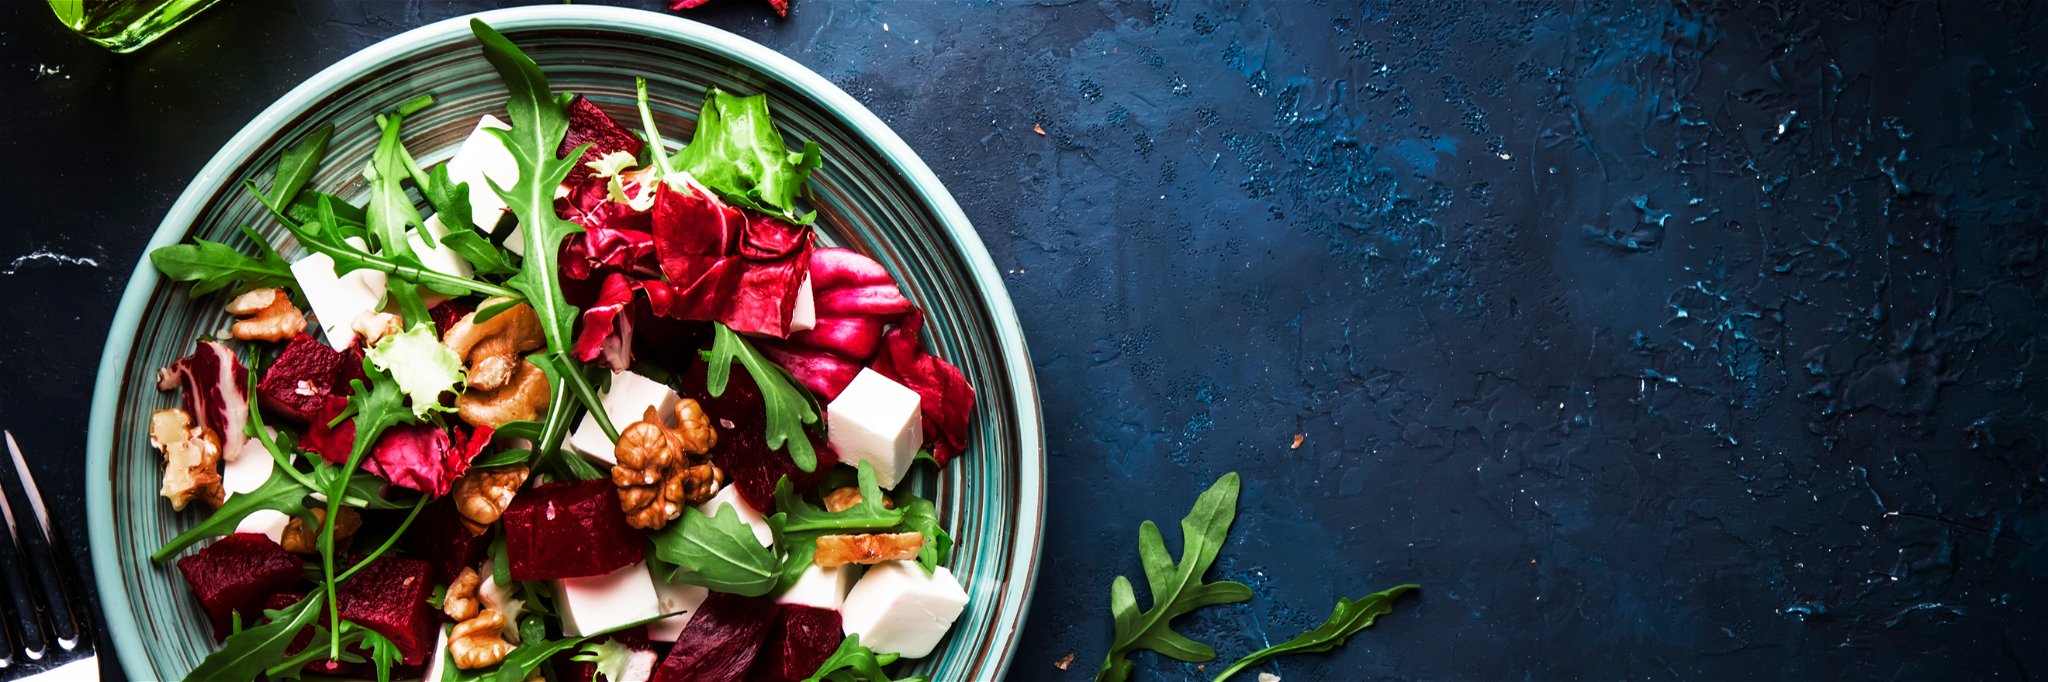 Our colourful and tasty&nbsp;recipes&nbsp;will make you crave a salad.